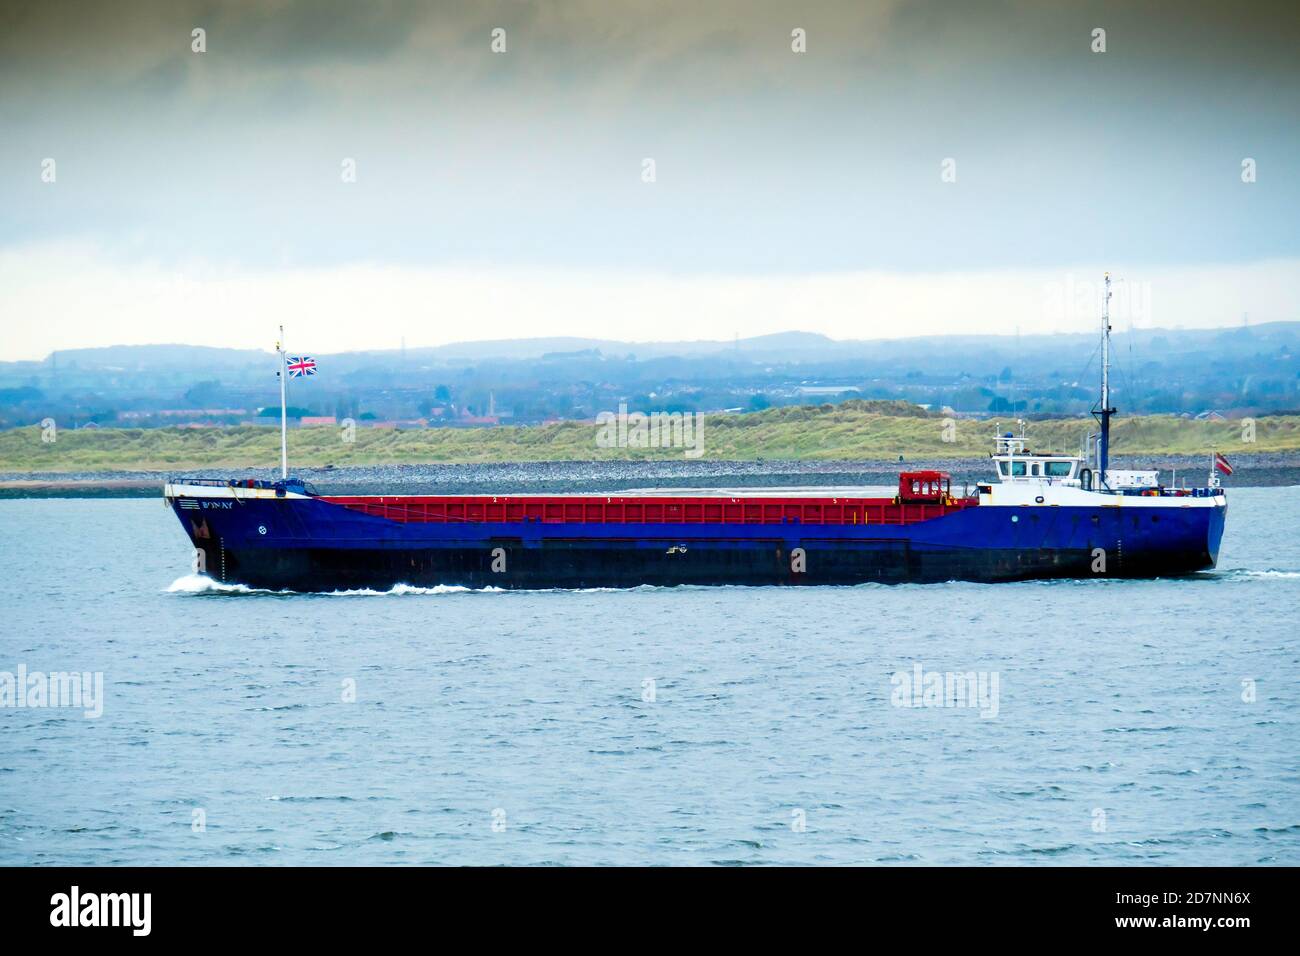 Latvian general Cargo ship BONAY IMO: 9033878 arriving in Teesport England UK from Wisbech Cambridgeshire, a shallow draft ship able to navigate inla Stock Photo